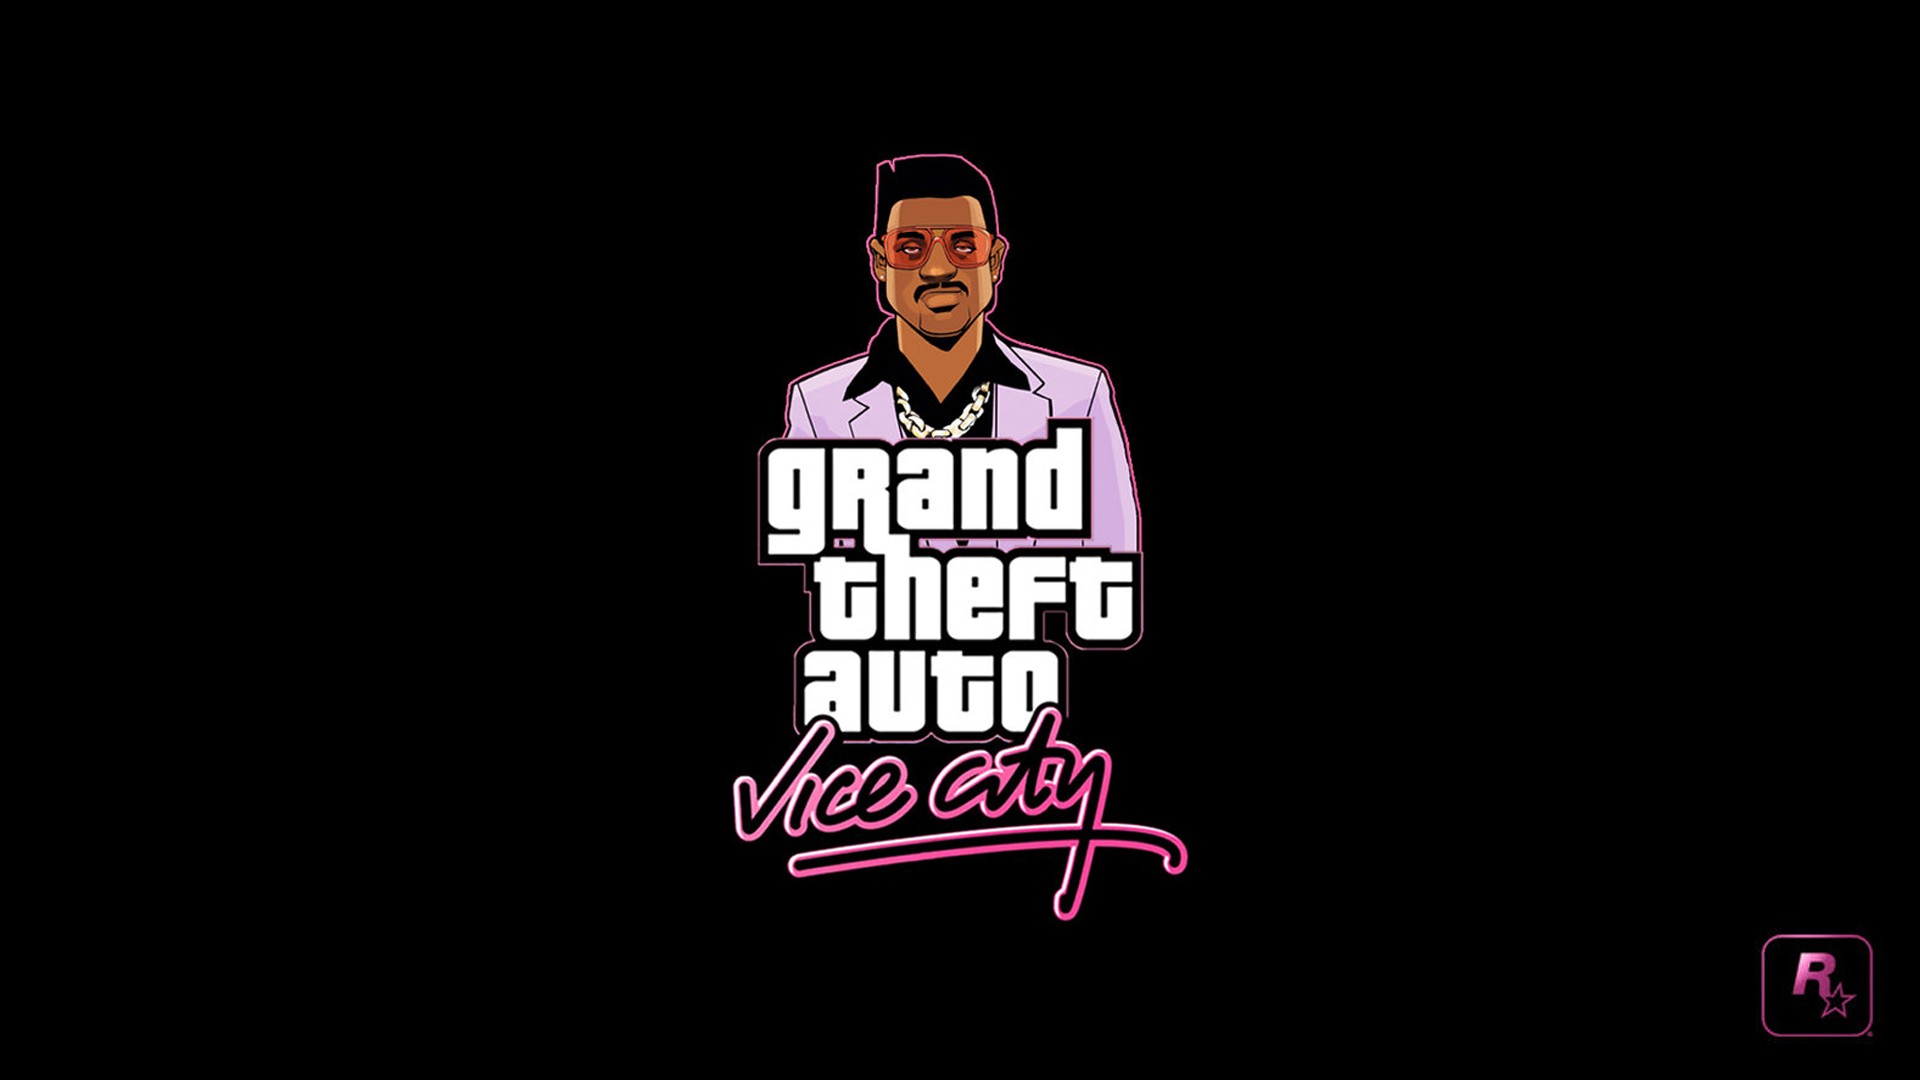 General 1920x1080 Grand Theft Auto: Vice City Rockstar Games PlayStation 2 video games Grand Theft Auto black background simple background video game characters video game men logo